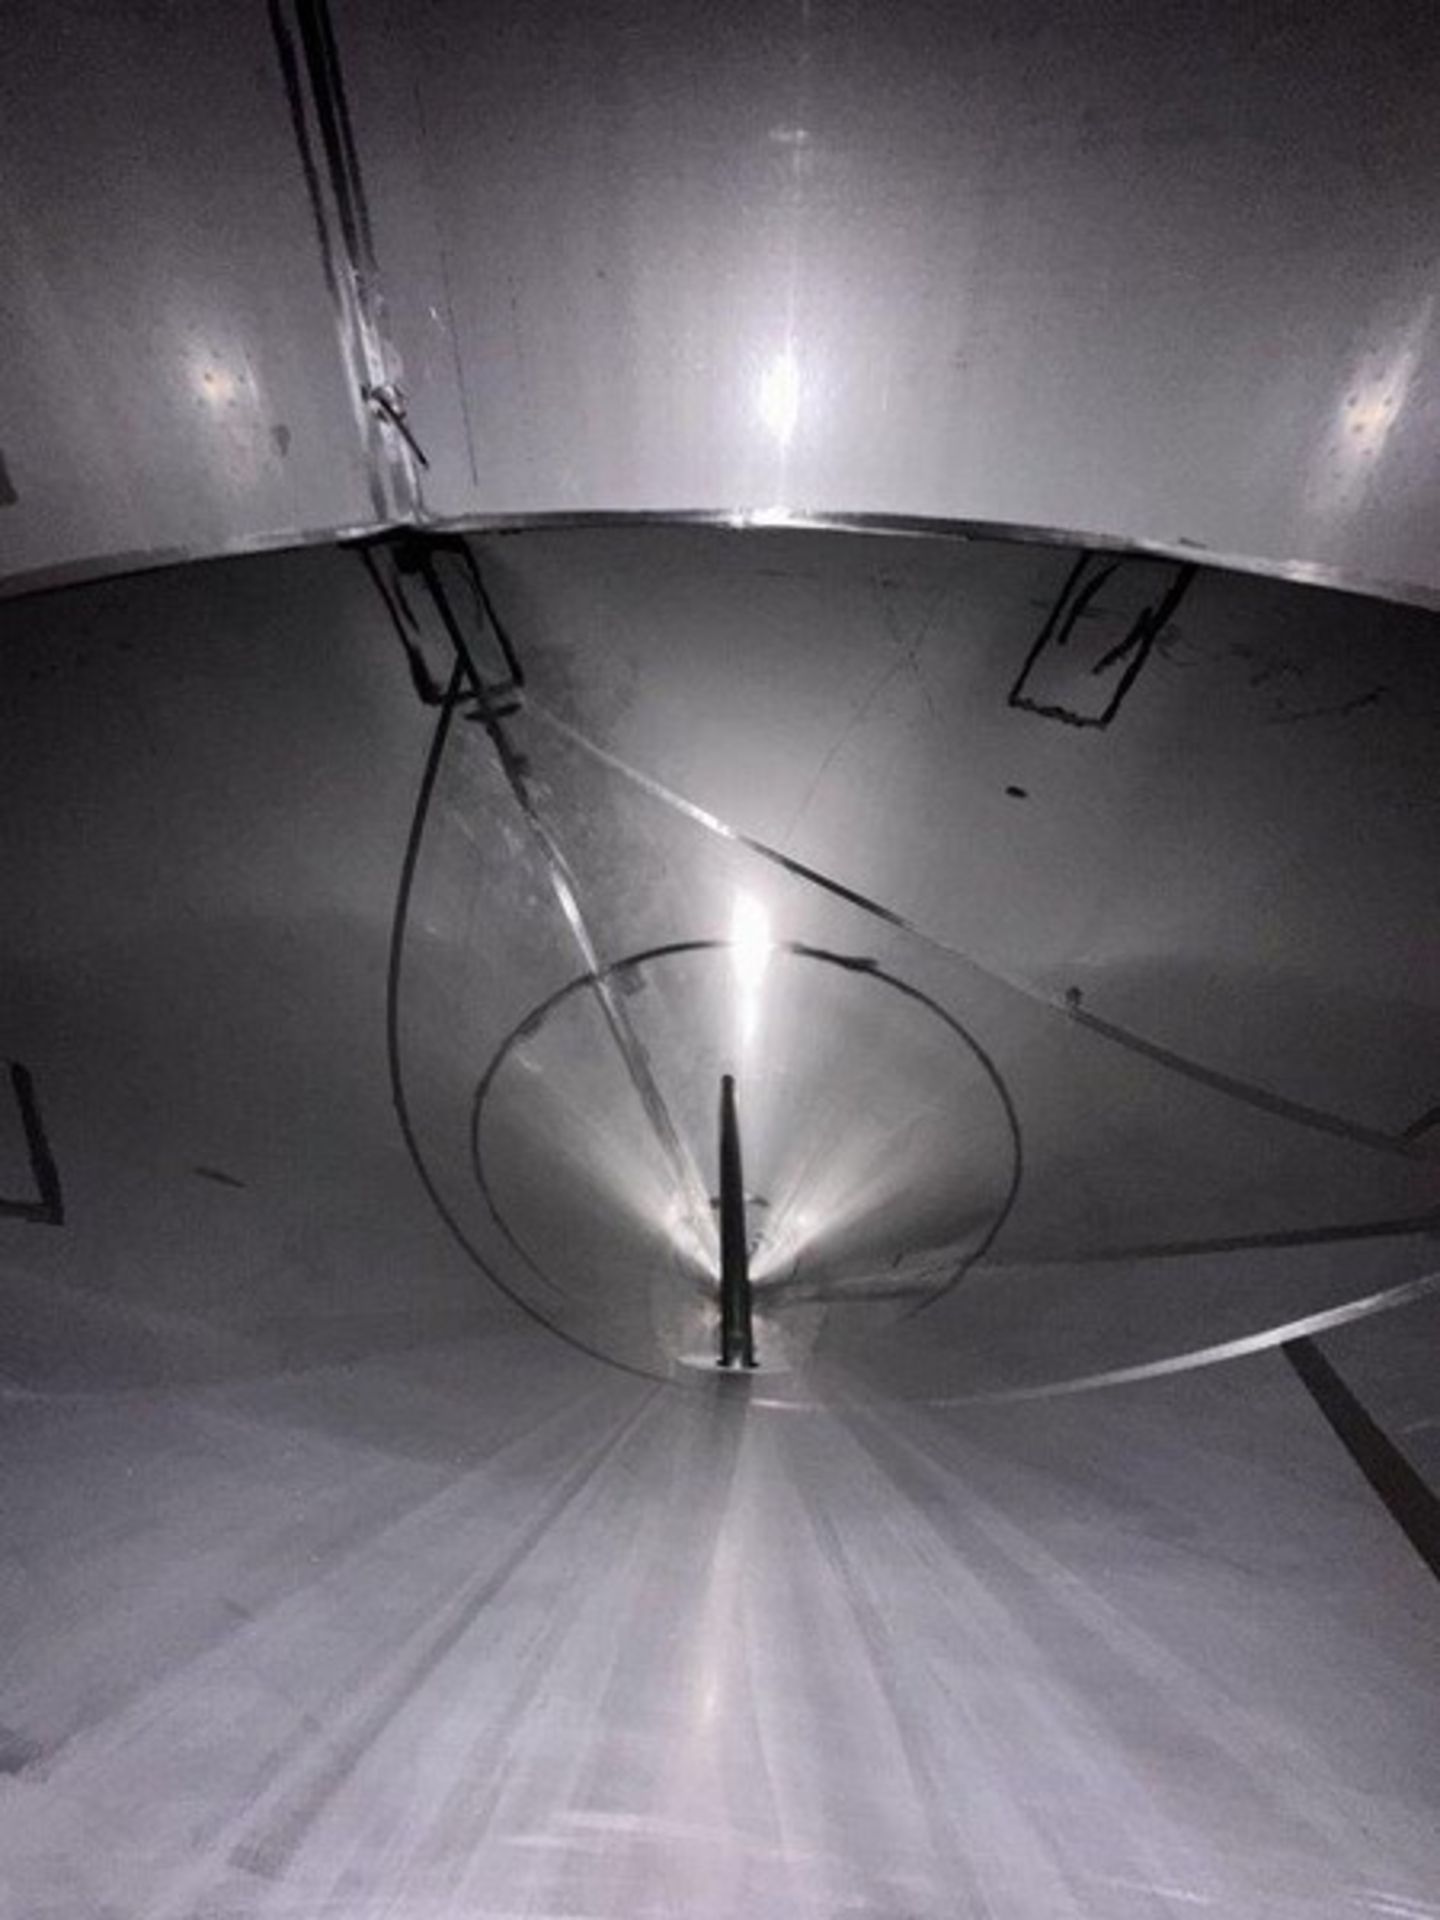 150 BBL (4650 Gallon) Vertical Cone Bottom 304 Stainless Steel Jacketed Vessel. Manufactured by San - Bild 5 aus 9